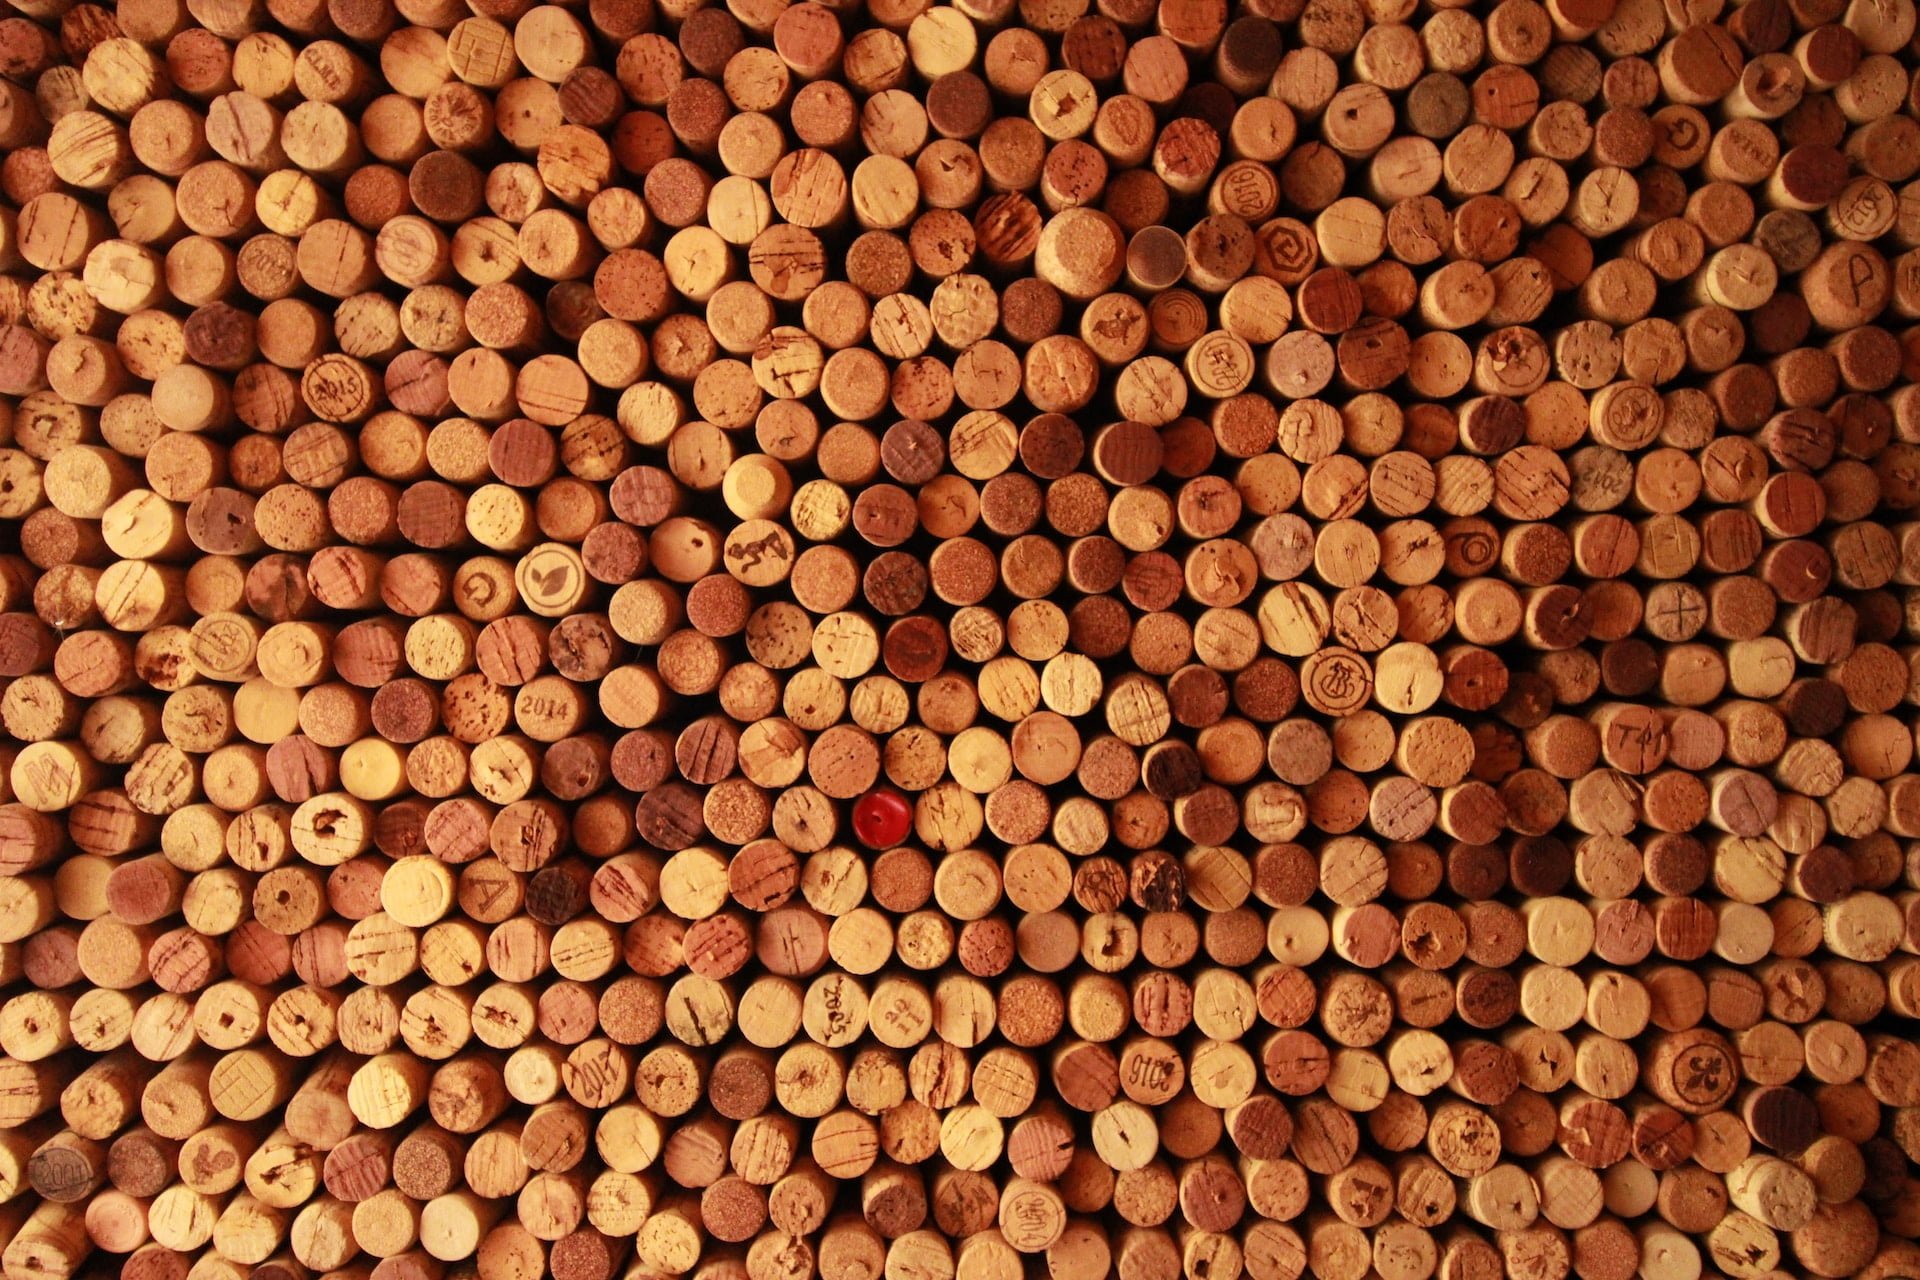 vince veras 1Df1X1upC0Q unsplash All the Ways to Use Ultra-Sustainable Cork in Your House